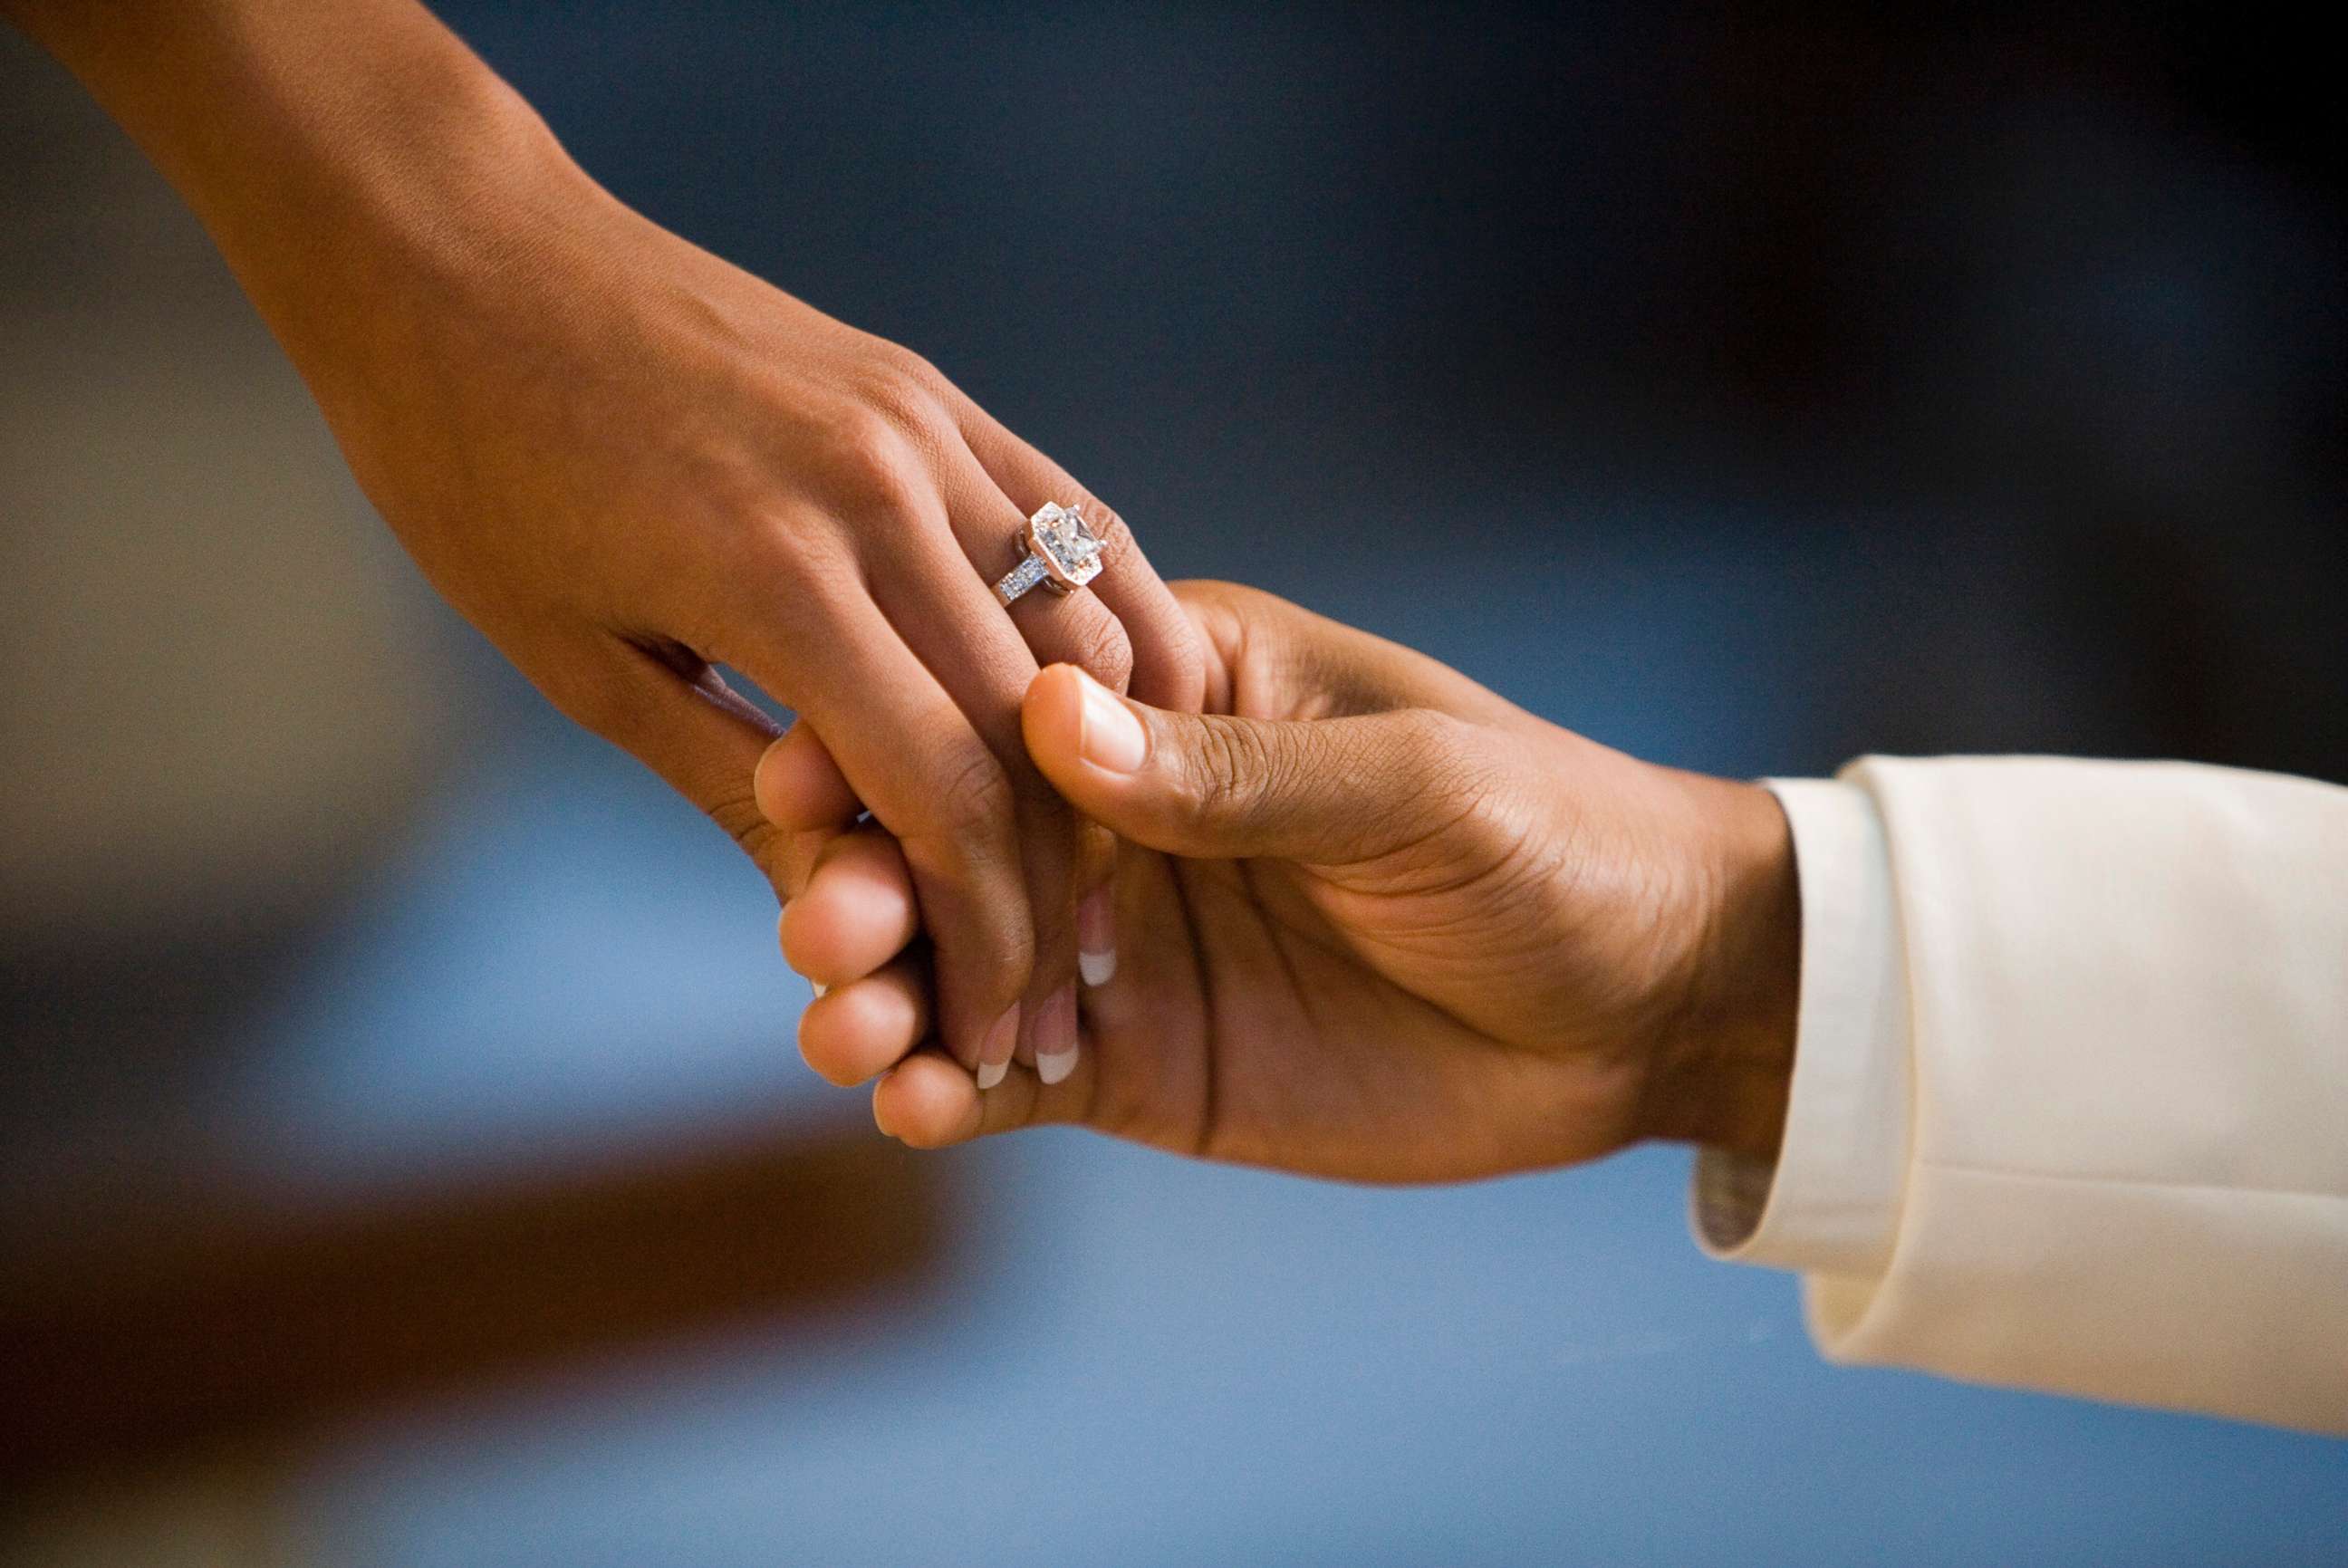 PHOTO: A man and woman hold hands showing off a large diamond ring in this undated stock photo.